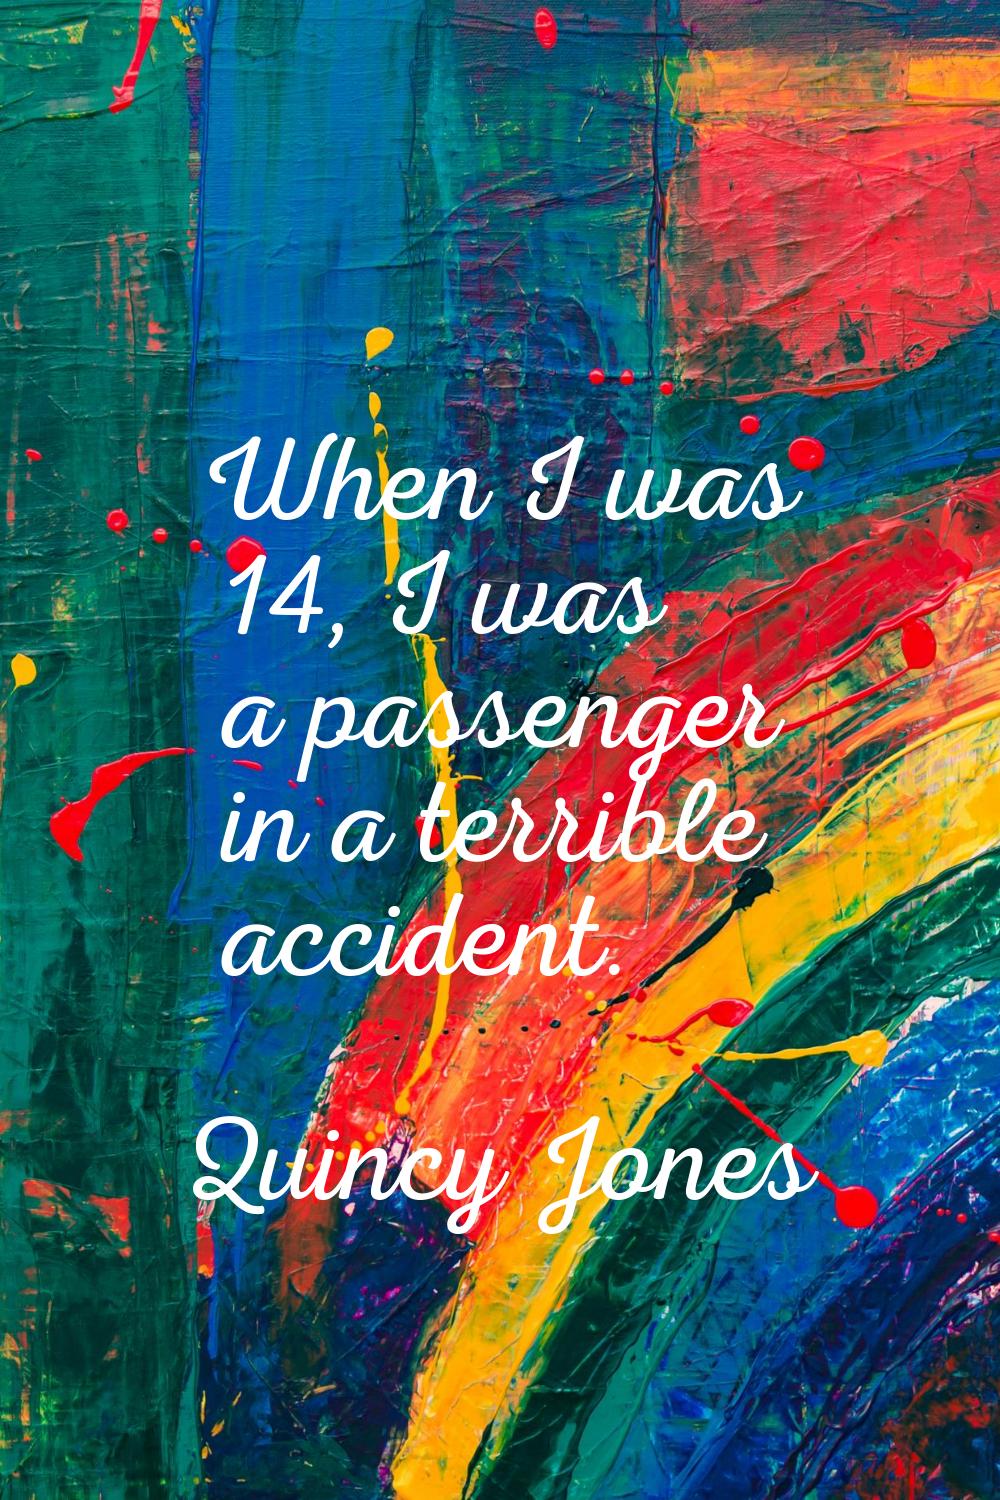 When I was 14, I was a passenger in a terrible accident.